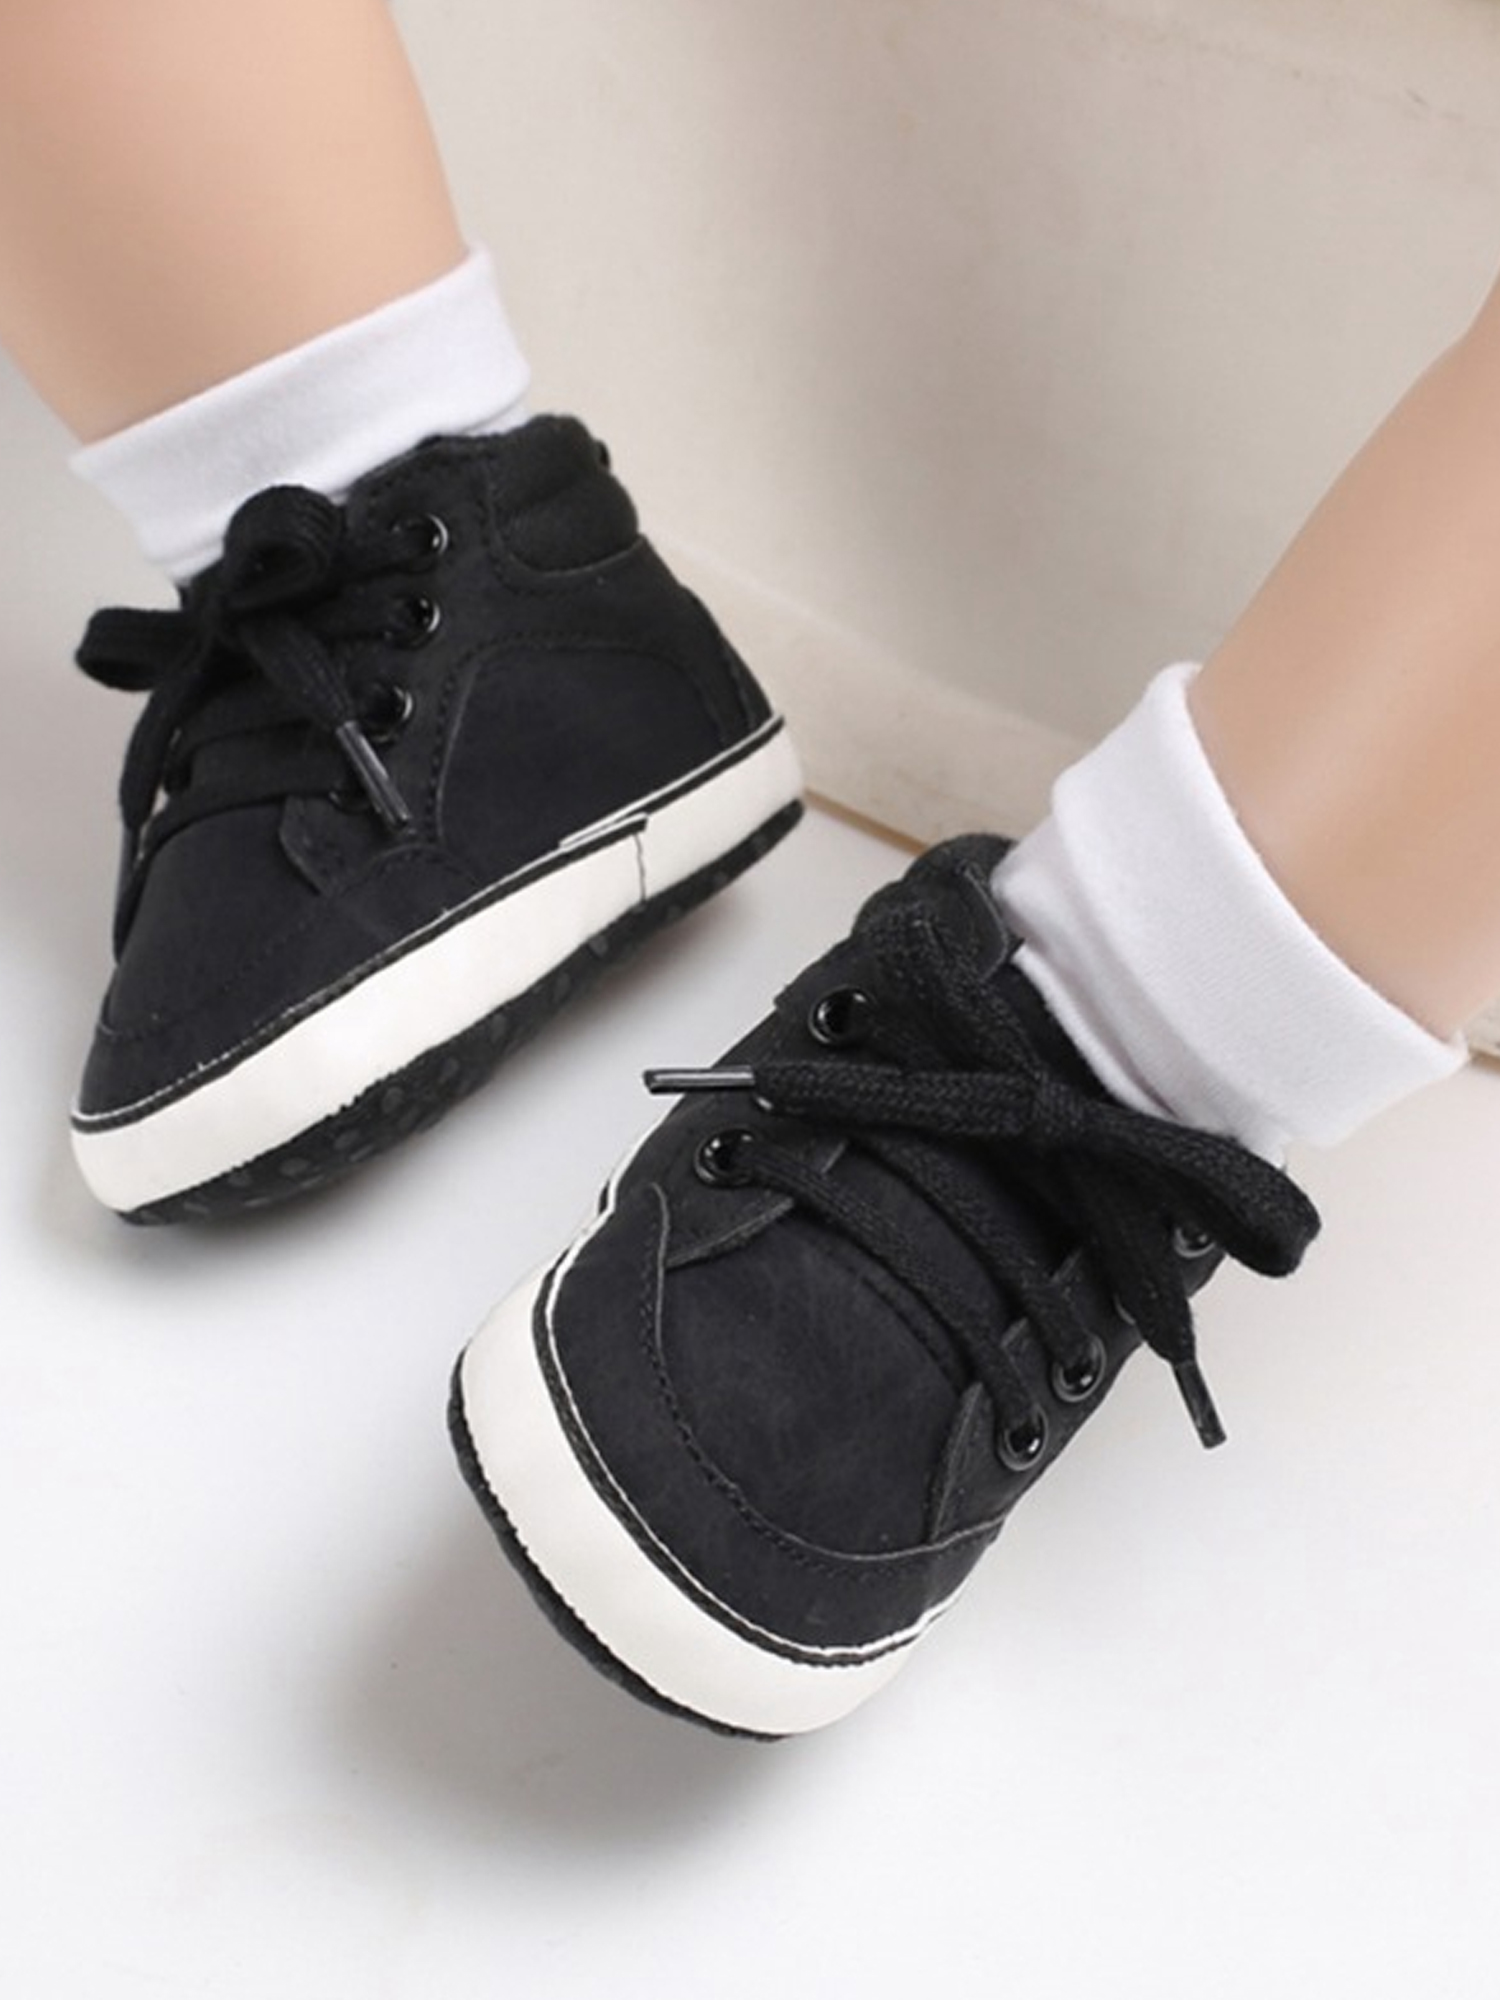 Hirigin Baby Boy Girl Casual Shoes Soft Sole Crib Shoes Flats Sneaker 0-18M - image 3 of 6